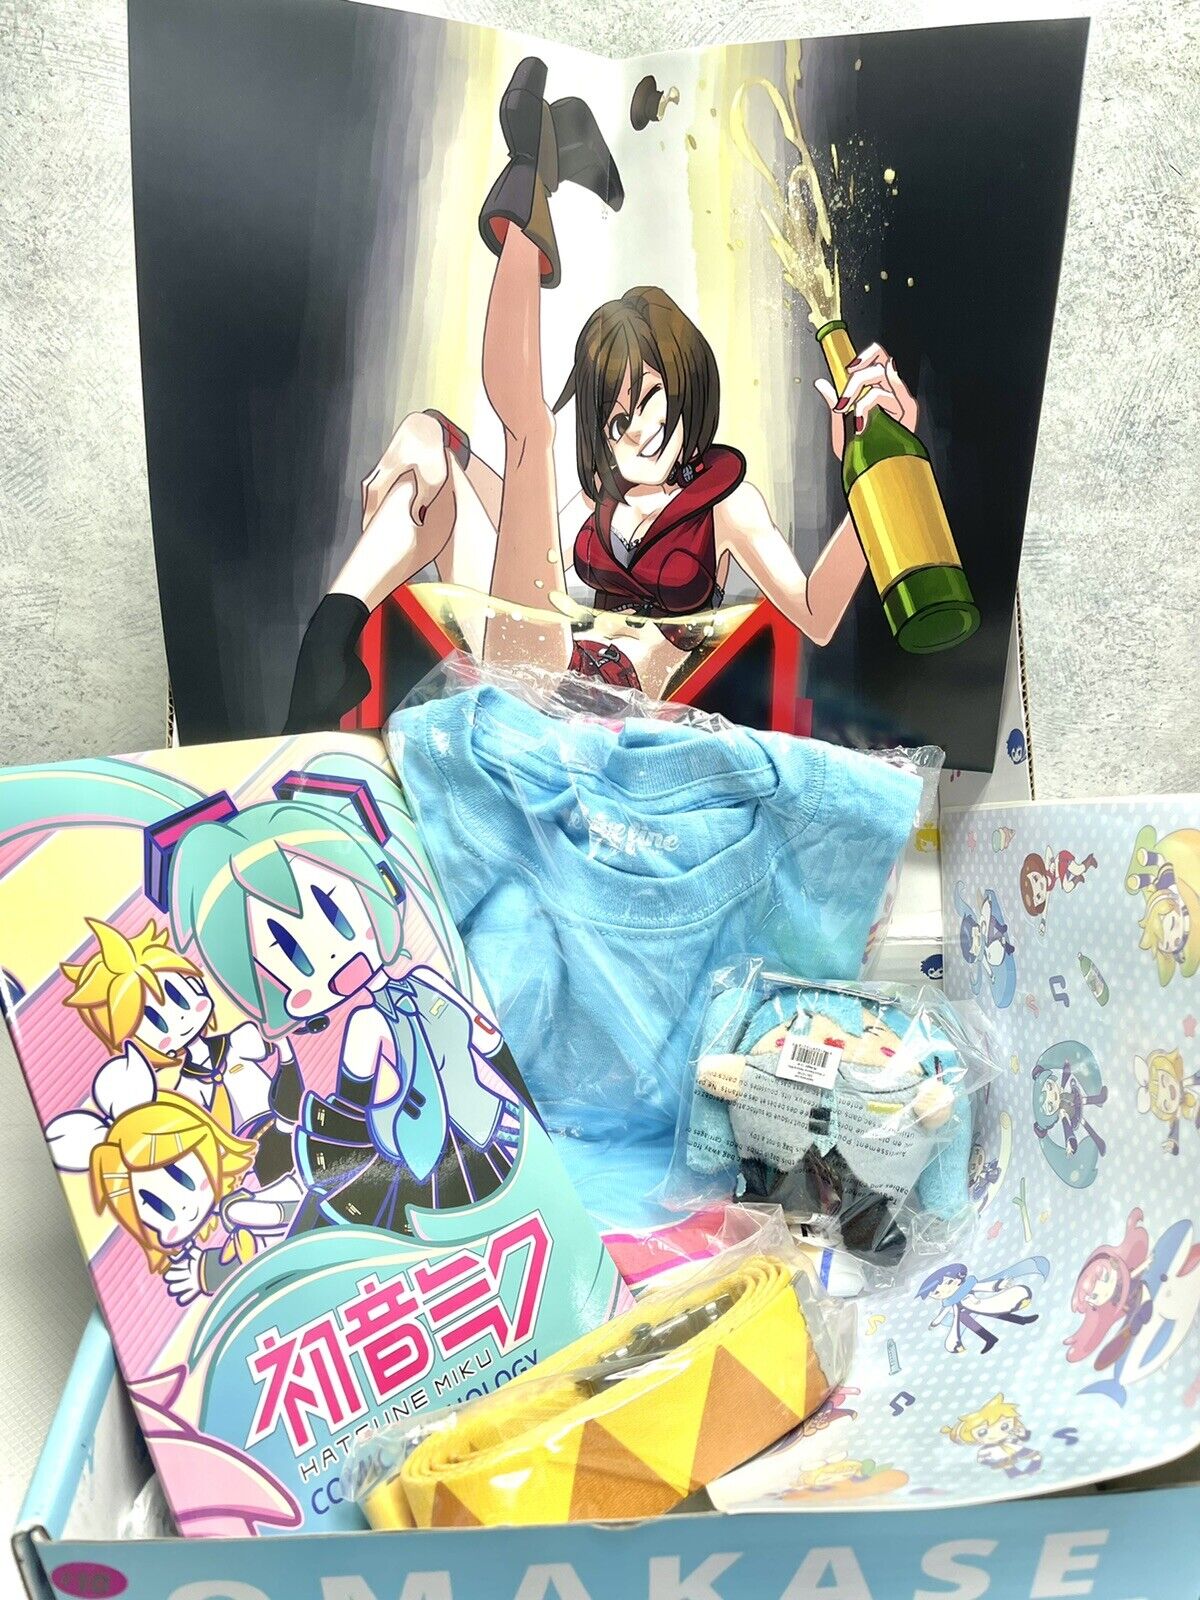 OMAKASE ENCORE ANIME COLLECTIBLE 2016 EXCLUSIVE Promotional Gift Box Exclusives